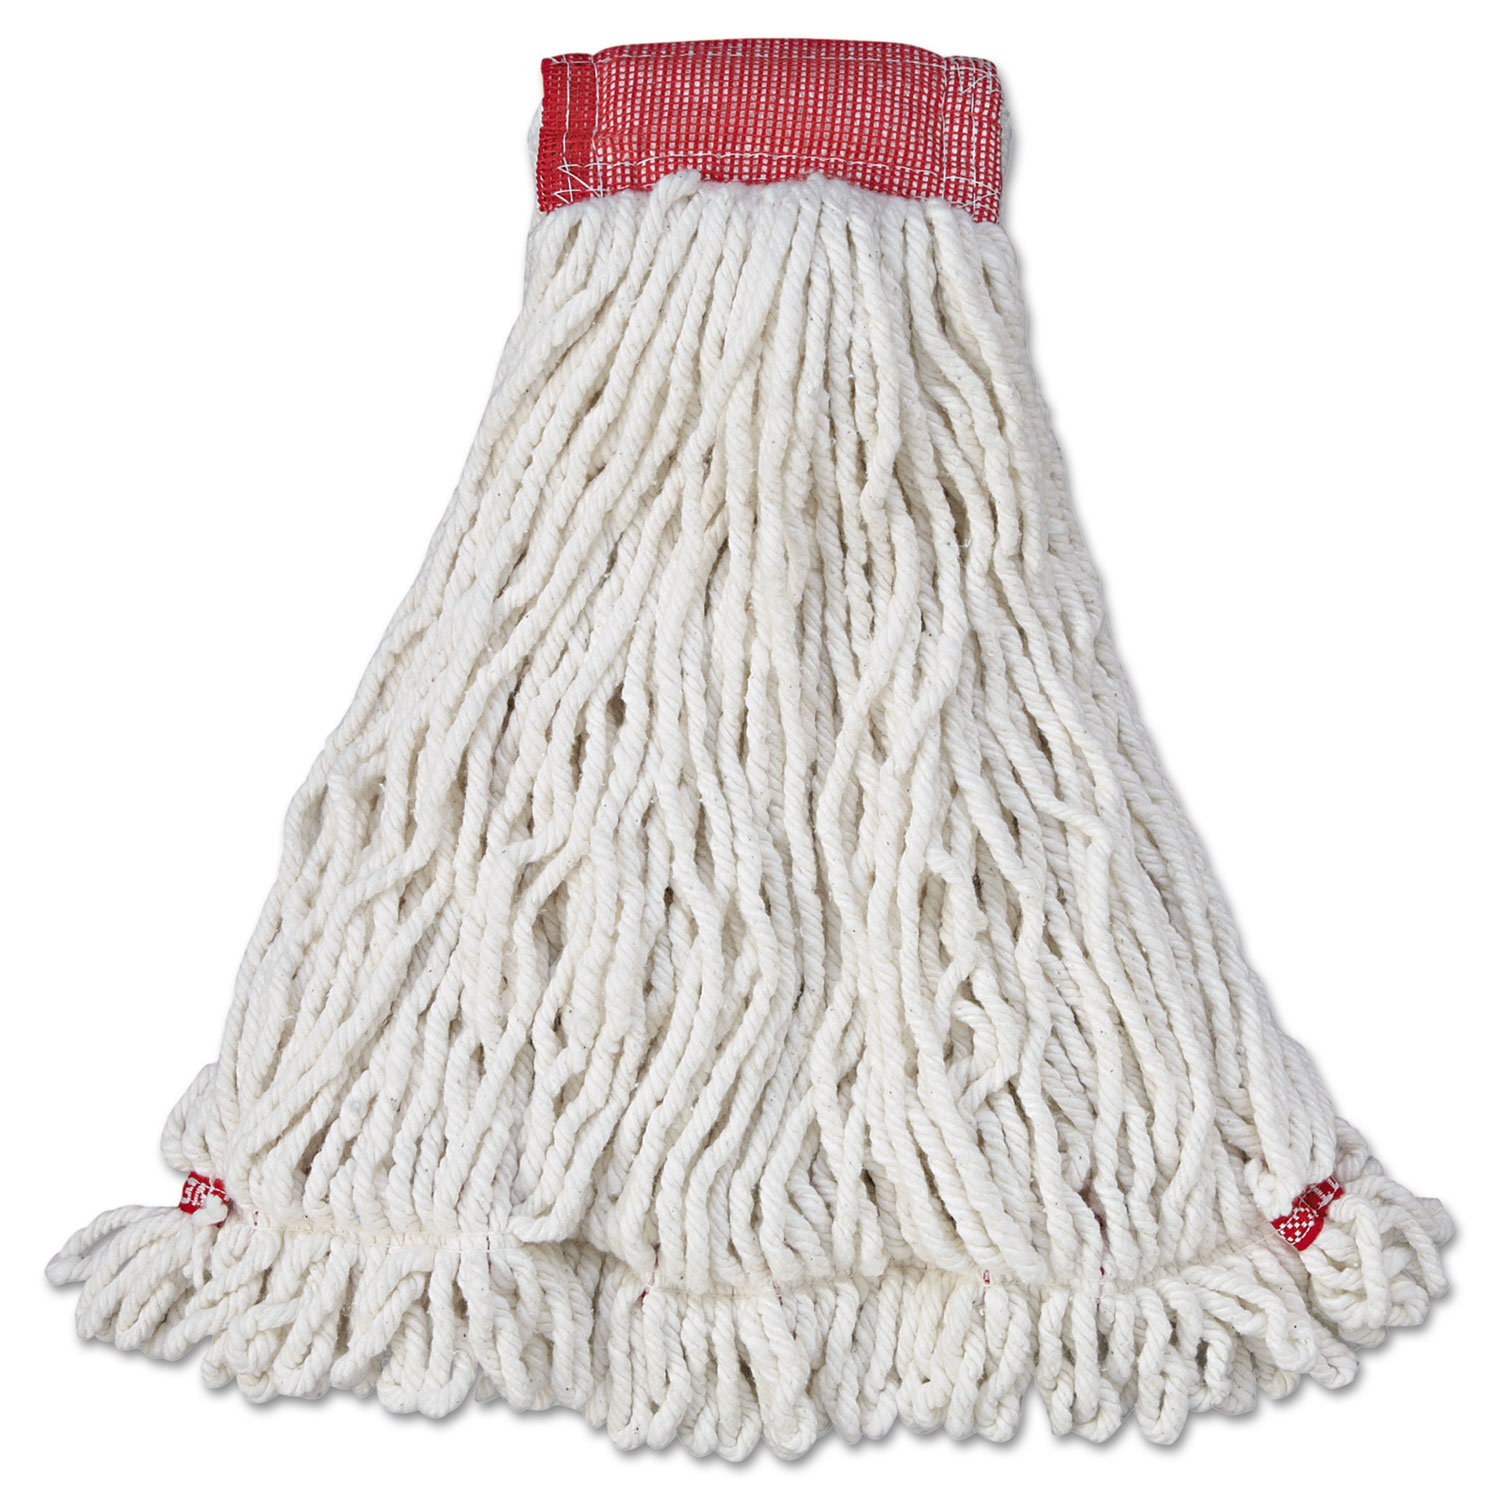  Rubbermaid Commercial FGA25306WH00 Web Foot Wet Mop Head, Shrinkless, Cotton/Synthetic, White, Large, 6/Carton (RCPA253WHI) 